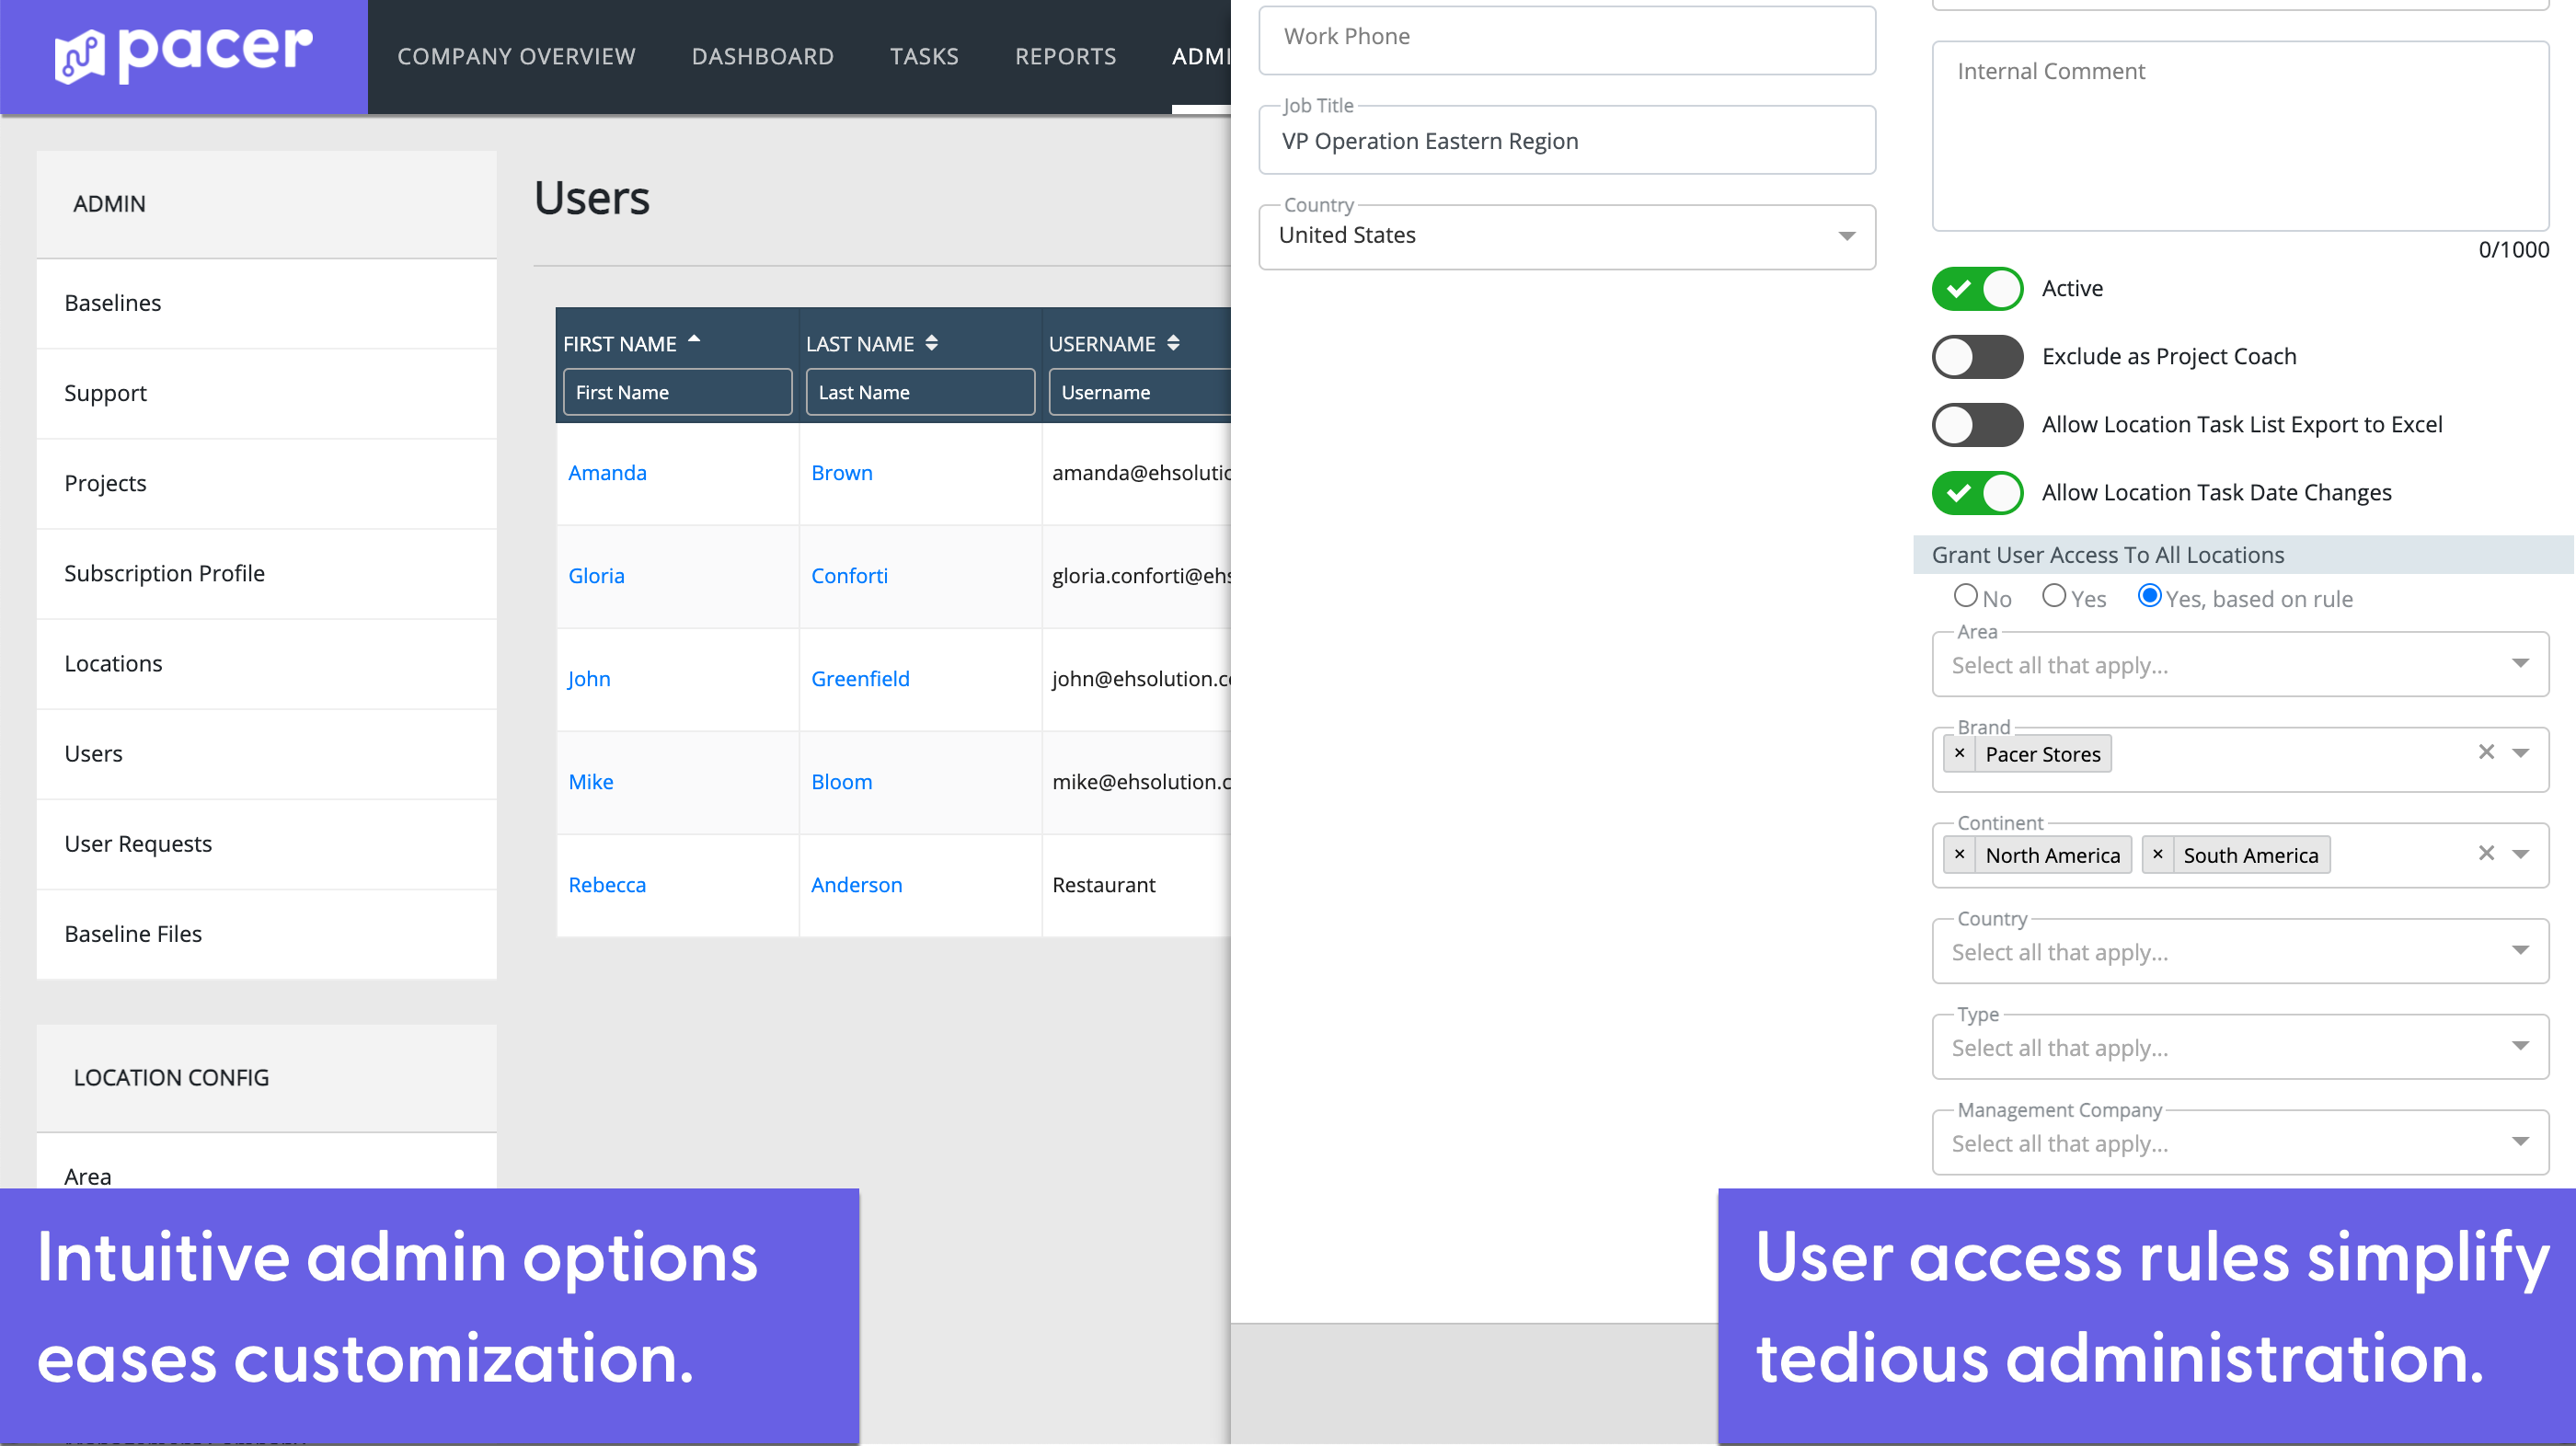 Simplified Administration - Flexibility and usability are key, and Pacer gives you plenty of both. The intuitively simple design is easy to manage, so administrators and teams can get more done in less time.